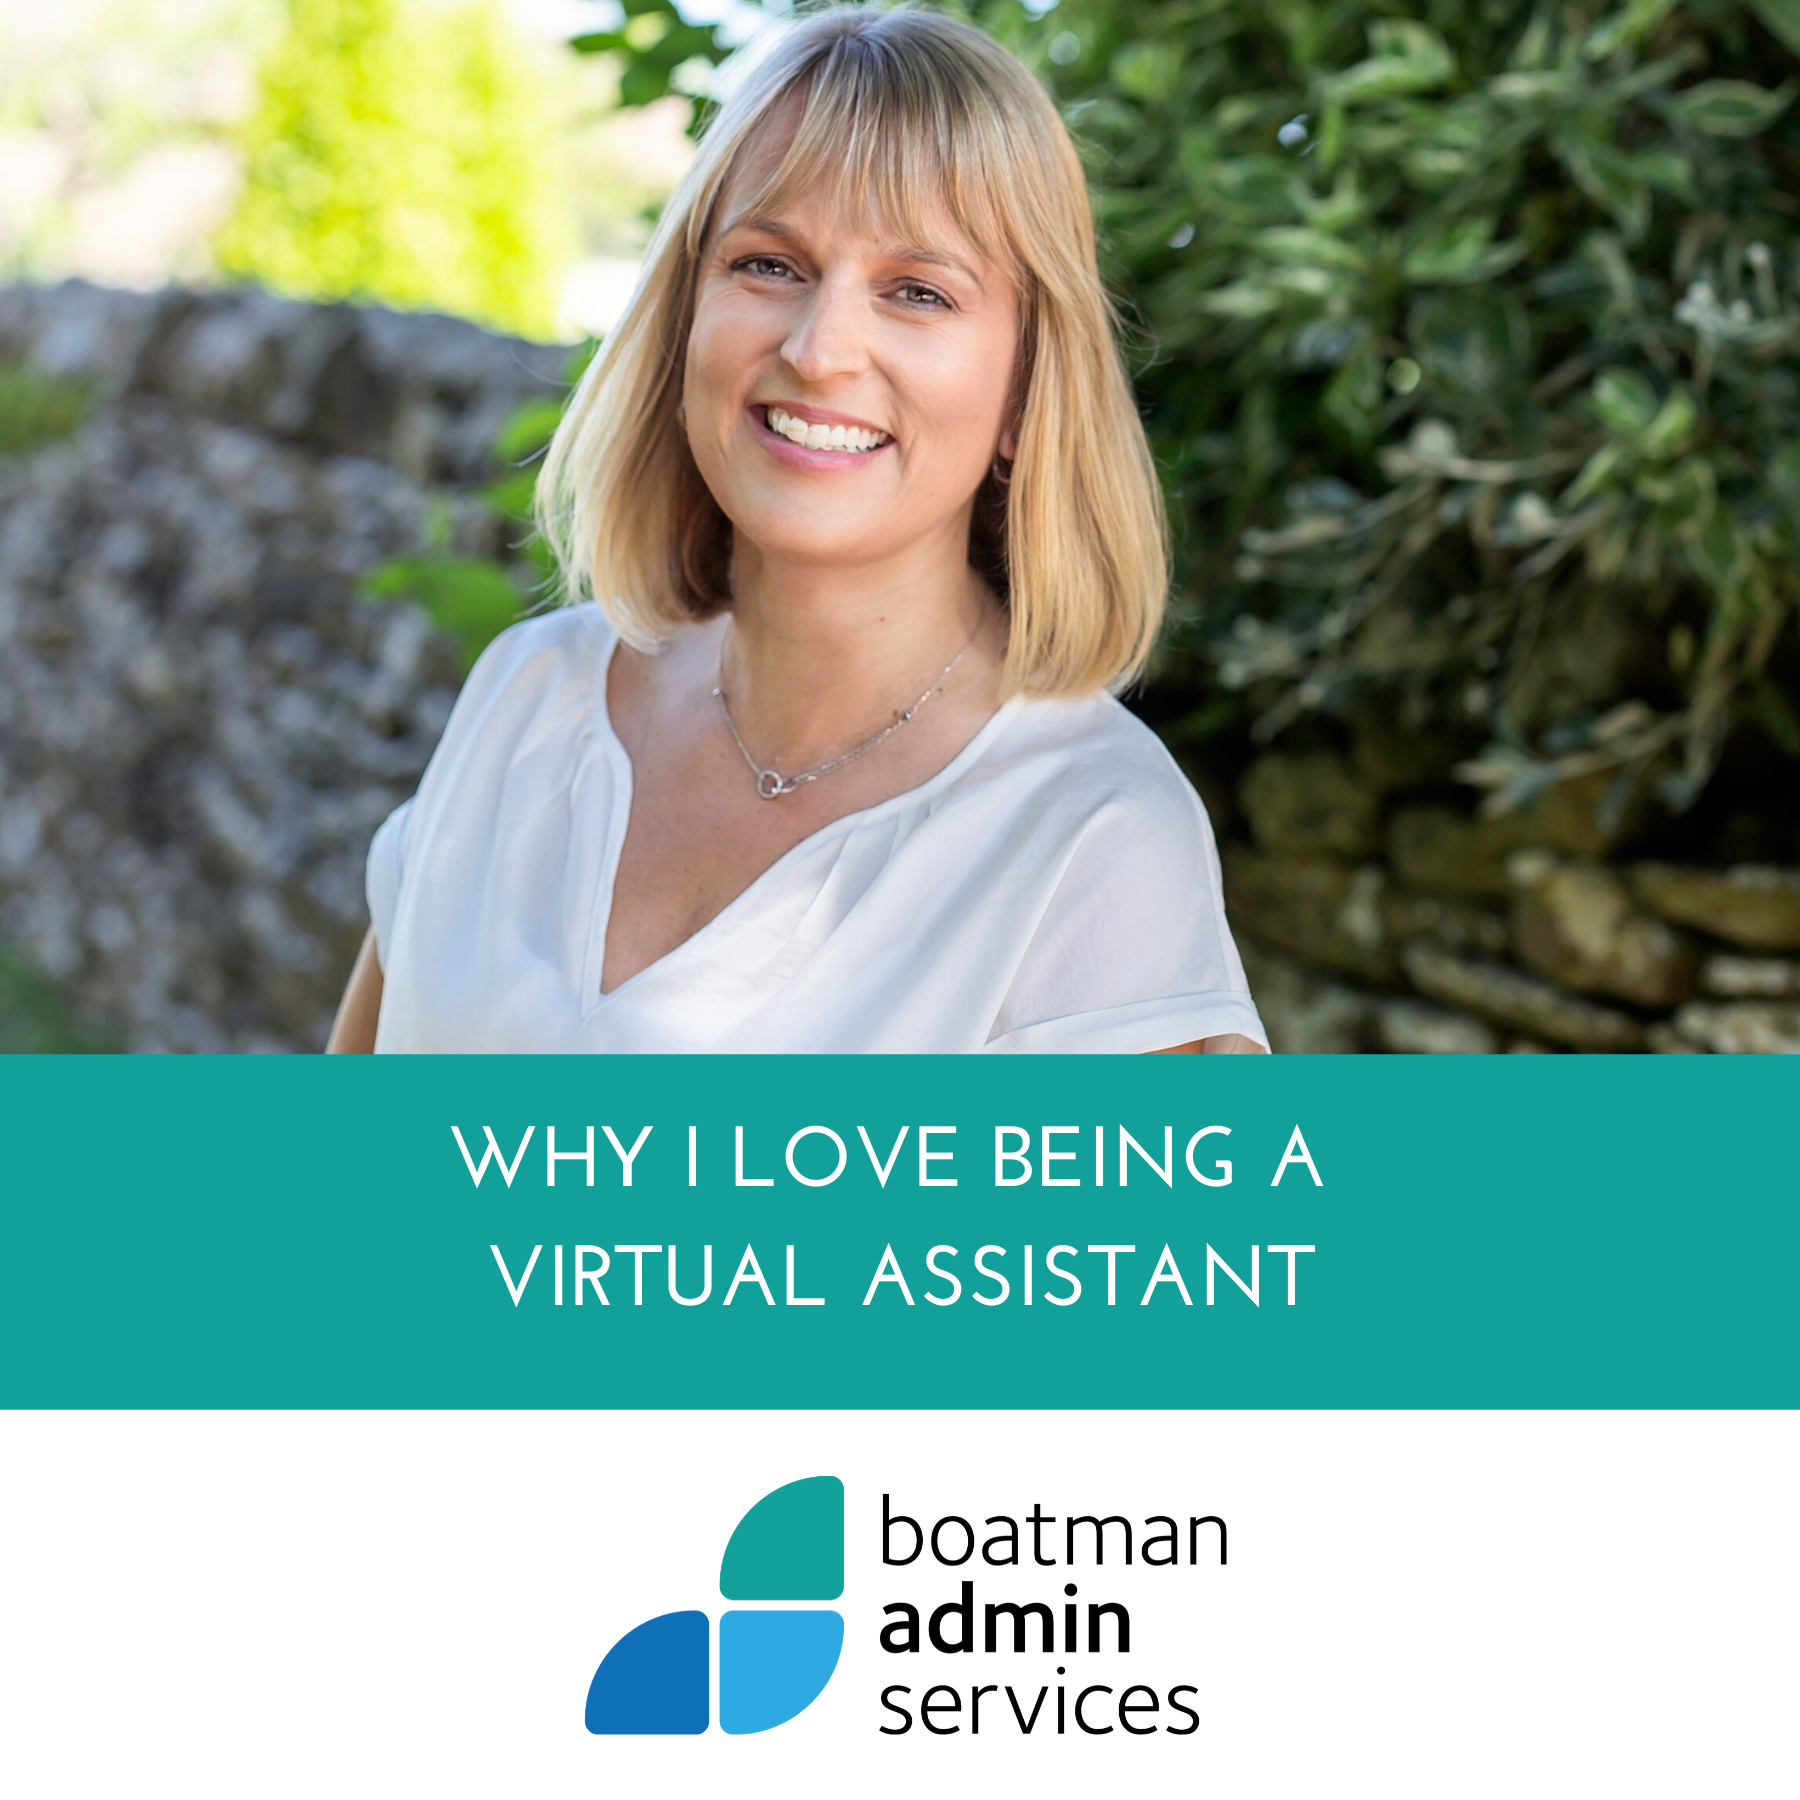 Why I love being a Virtual Assistant